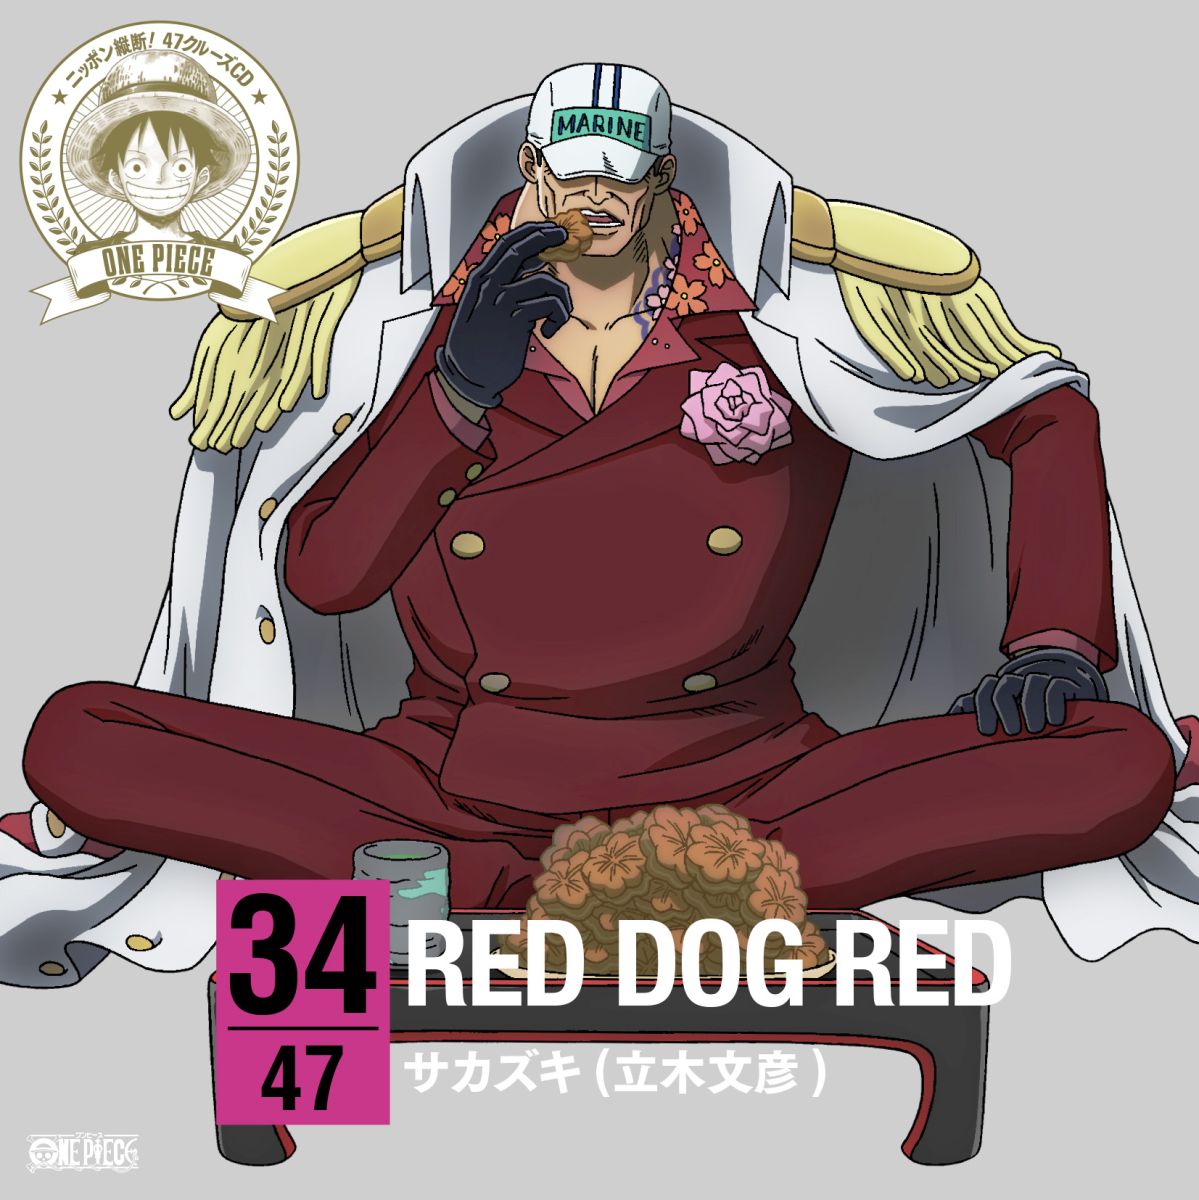 ONE PIECE ニッポン縦断! 47クルーズCD in 広島 RED DOG RED 